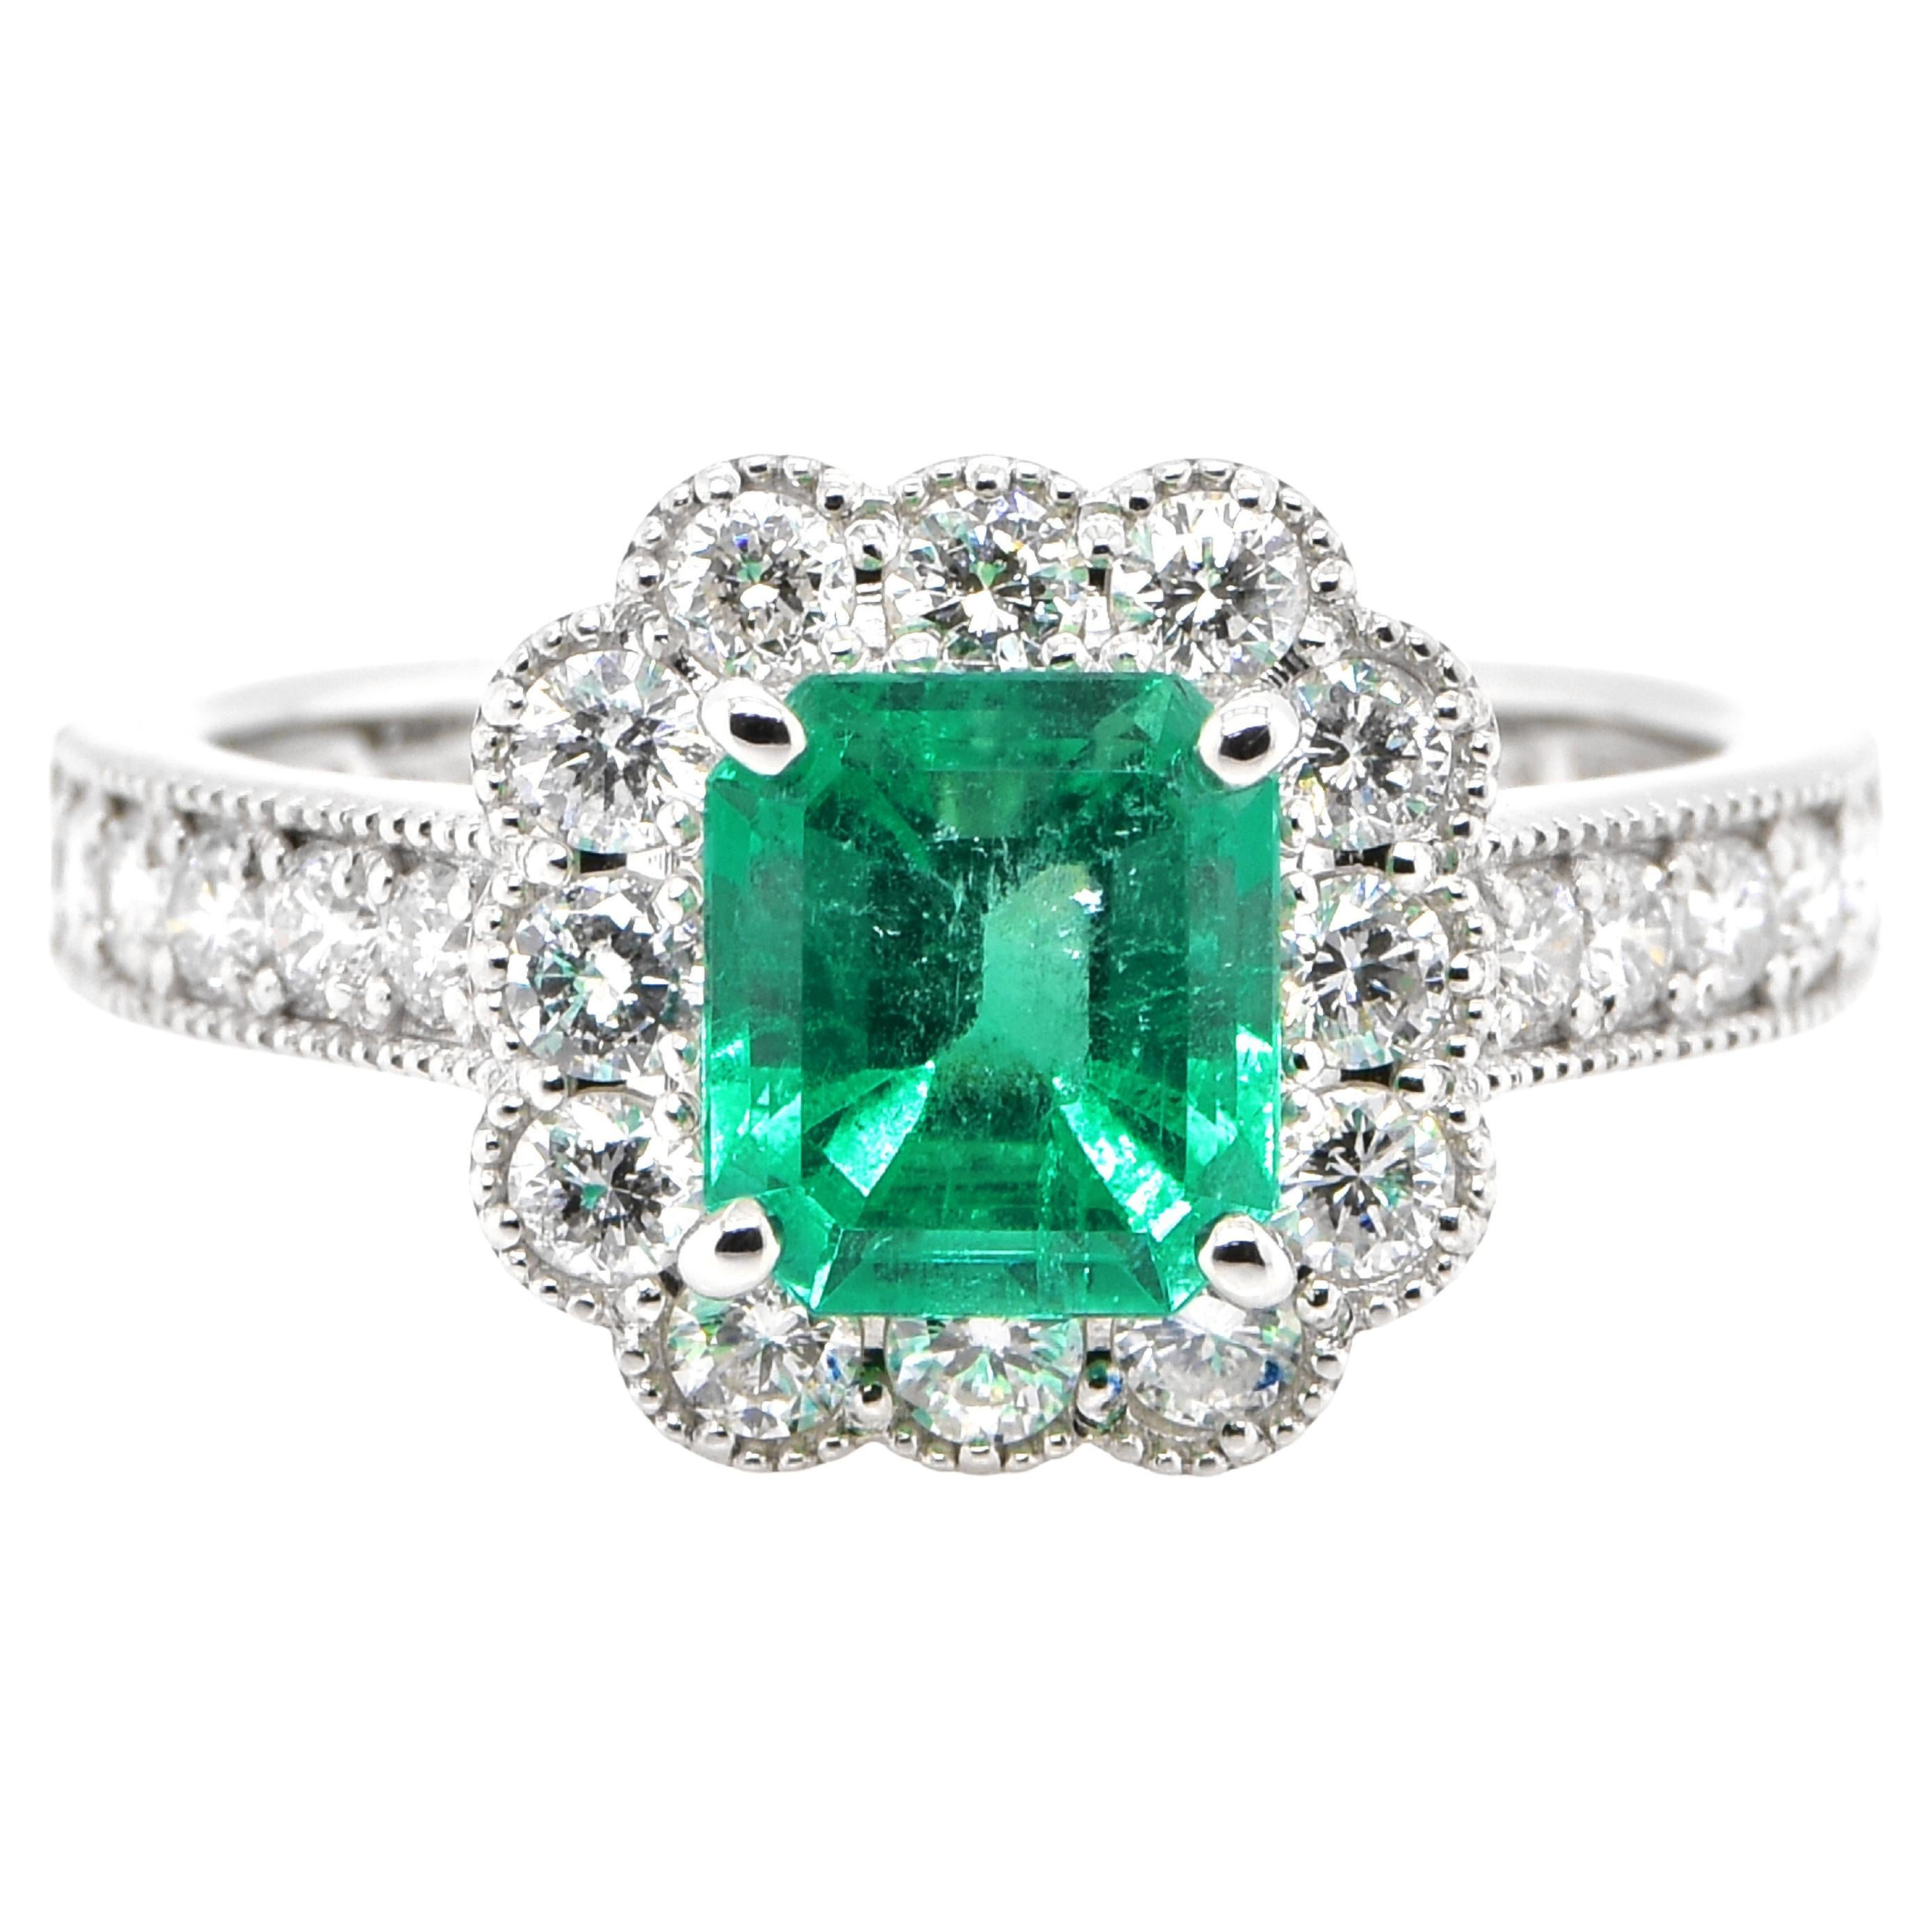 1.36 Carat Natural Colombian Emerald and Diamond Halo Ring set in Platinum